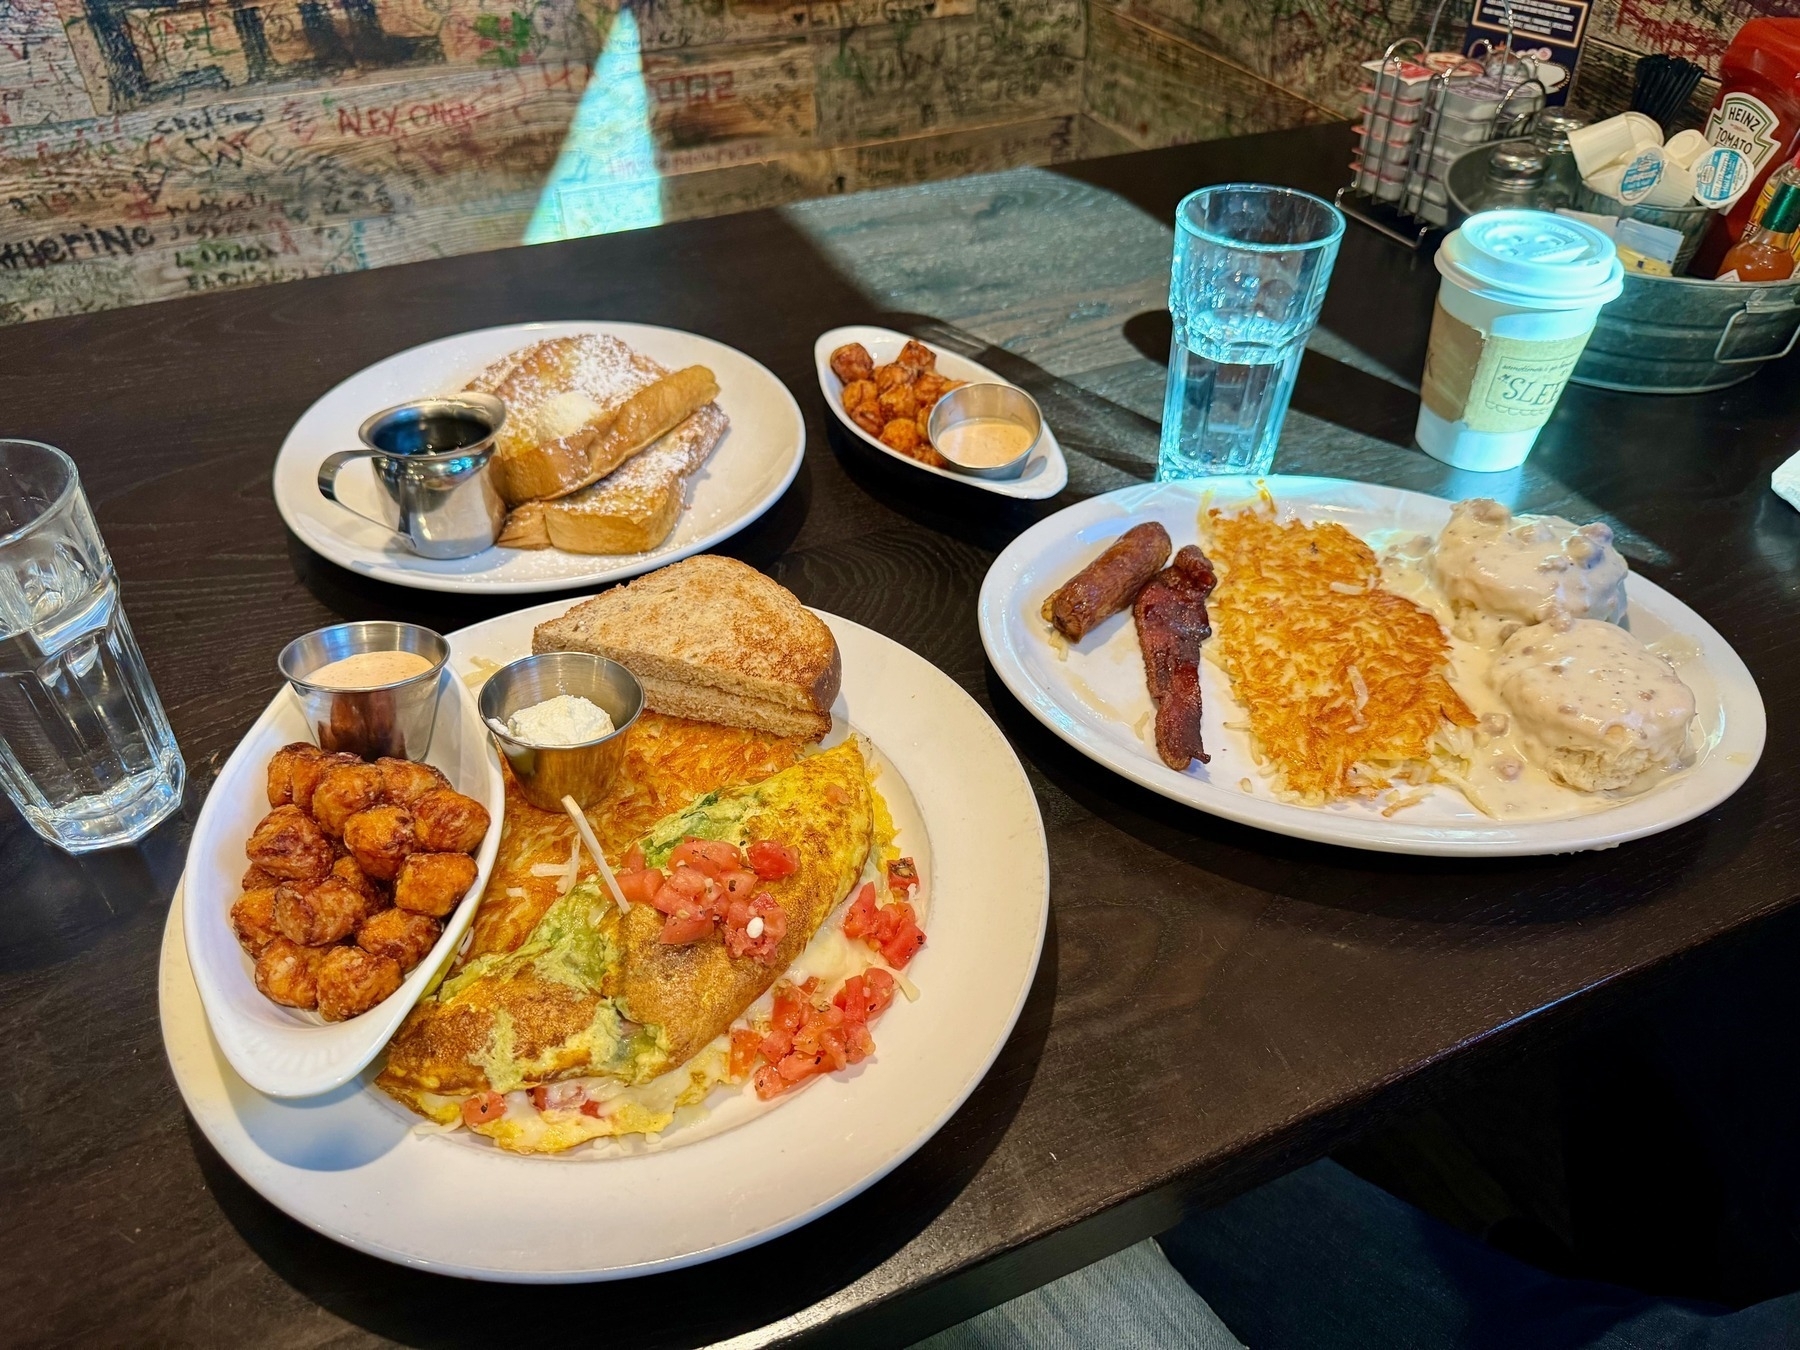 Four plates full of breakfast food, with an omlet, hashbrows, biscuits / gravey, french toast, two servings of tots, and toast...along with two glasses of water and a cup of coffee in a paper cup.